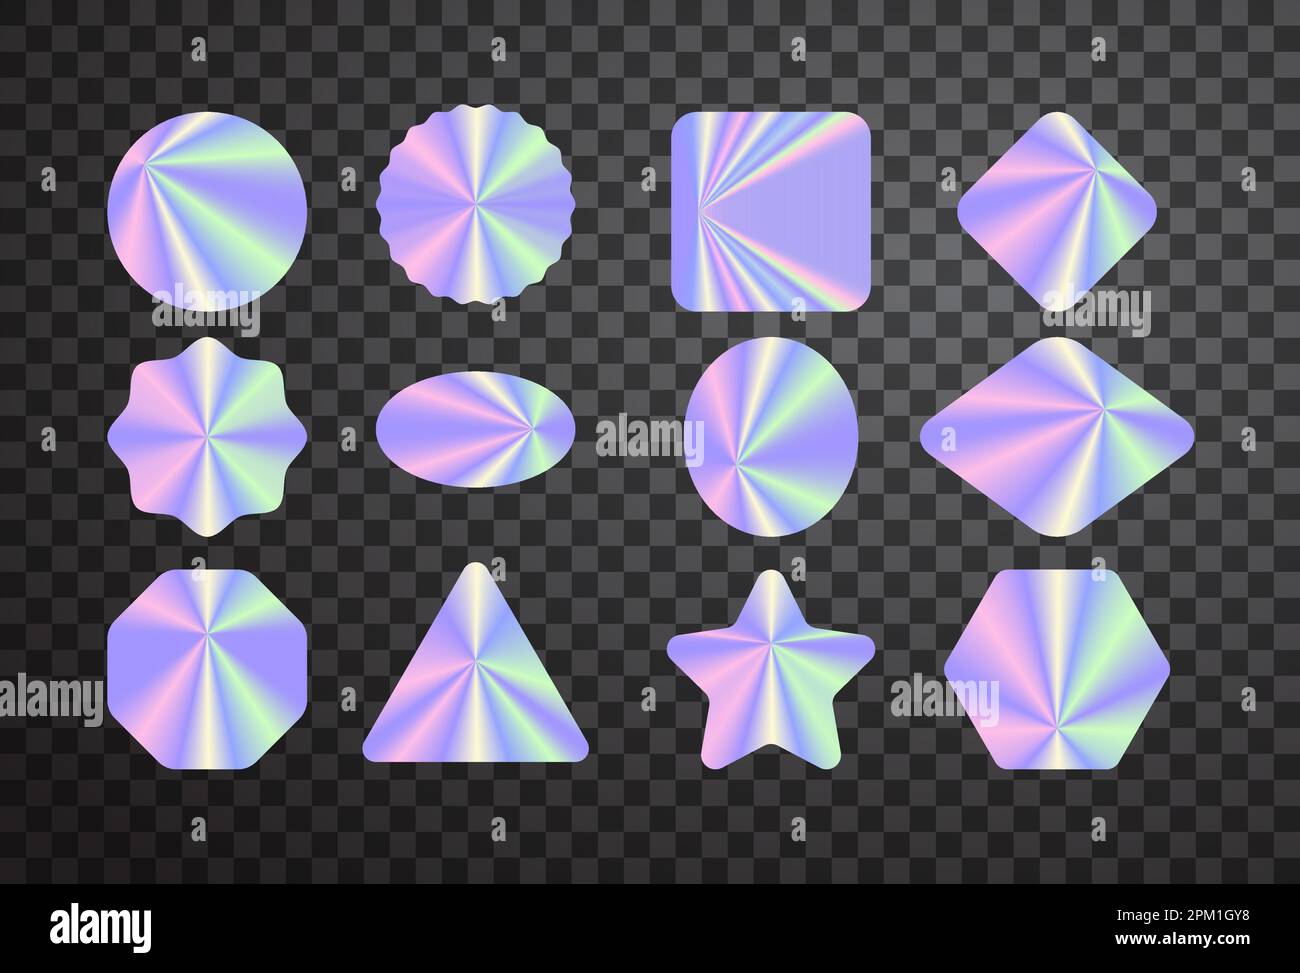 Bright hologram vector stickers on transparent backdrop. Rainbow colored glowing badges in different shapes. Vector illustration Stock Vector